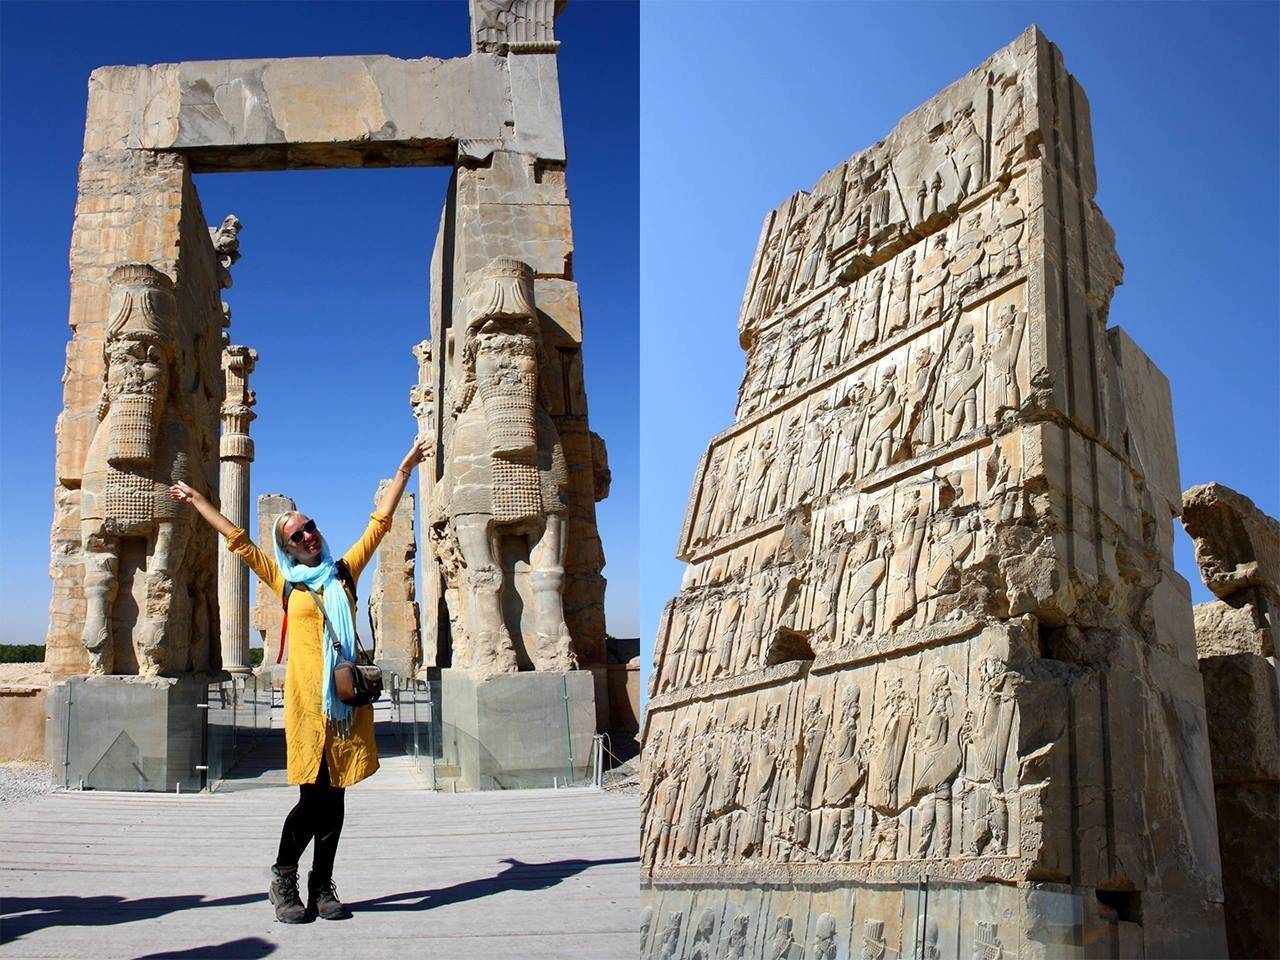 Persepolis - capital of Persian empire. The Gates of All Lands.